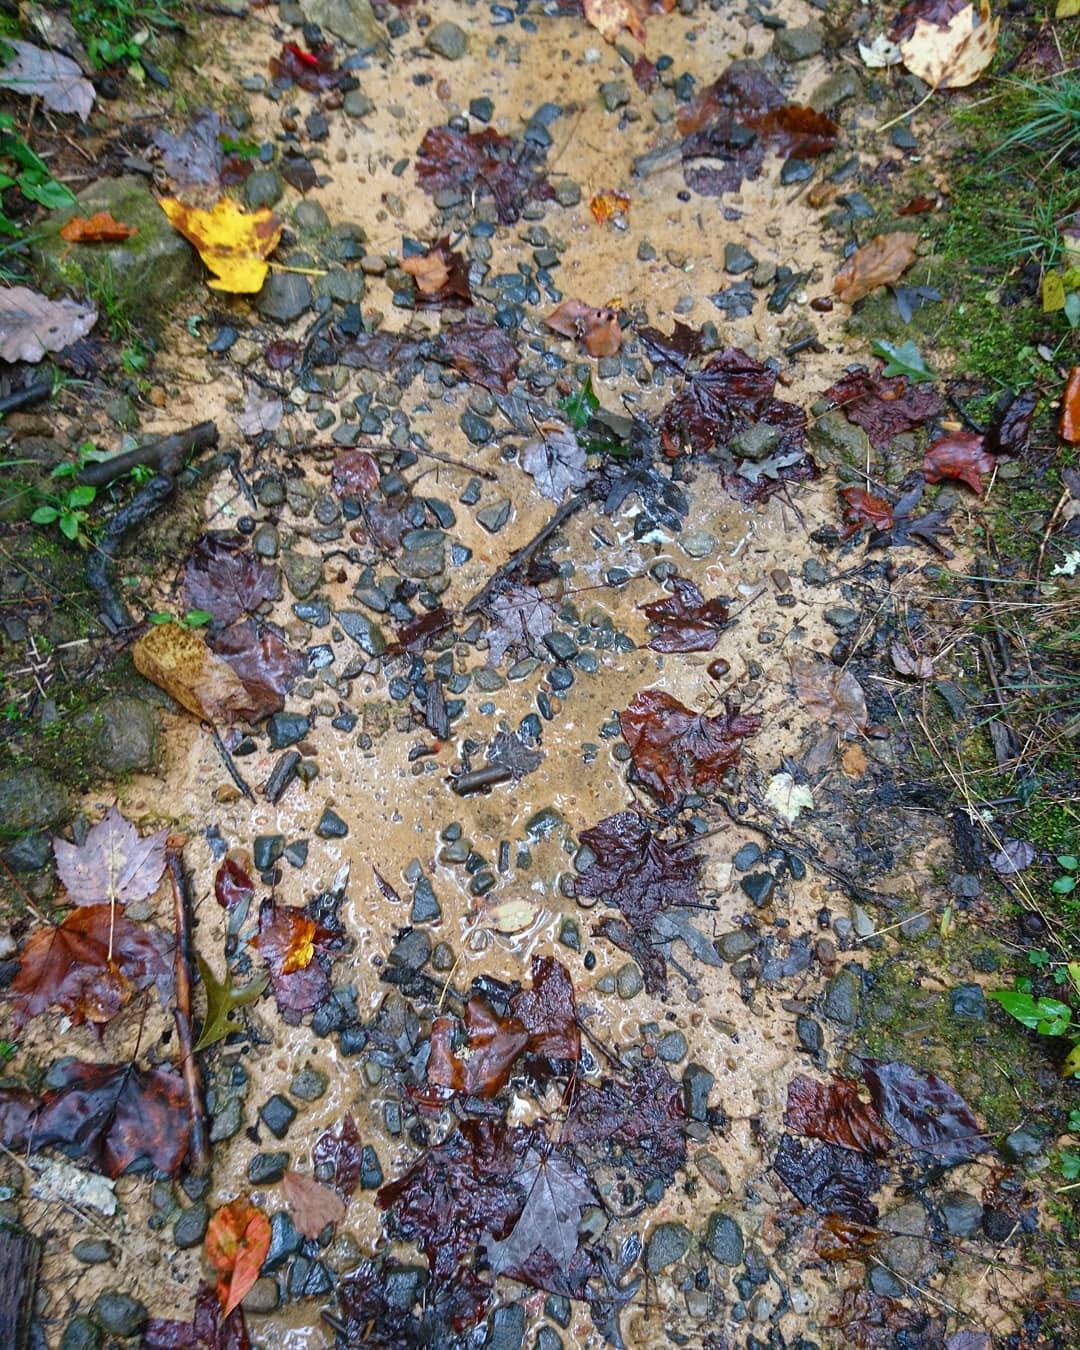 A close-up of the muddy Appalachian trail littered with fallen autumn leaves